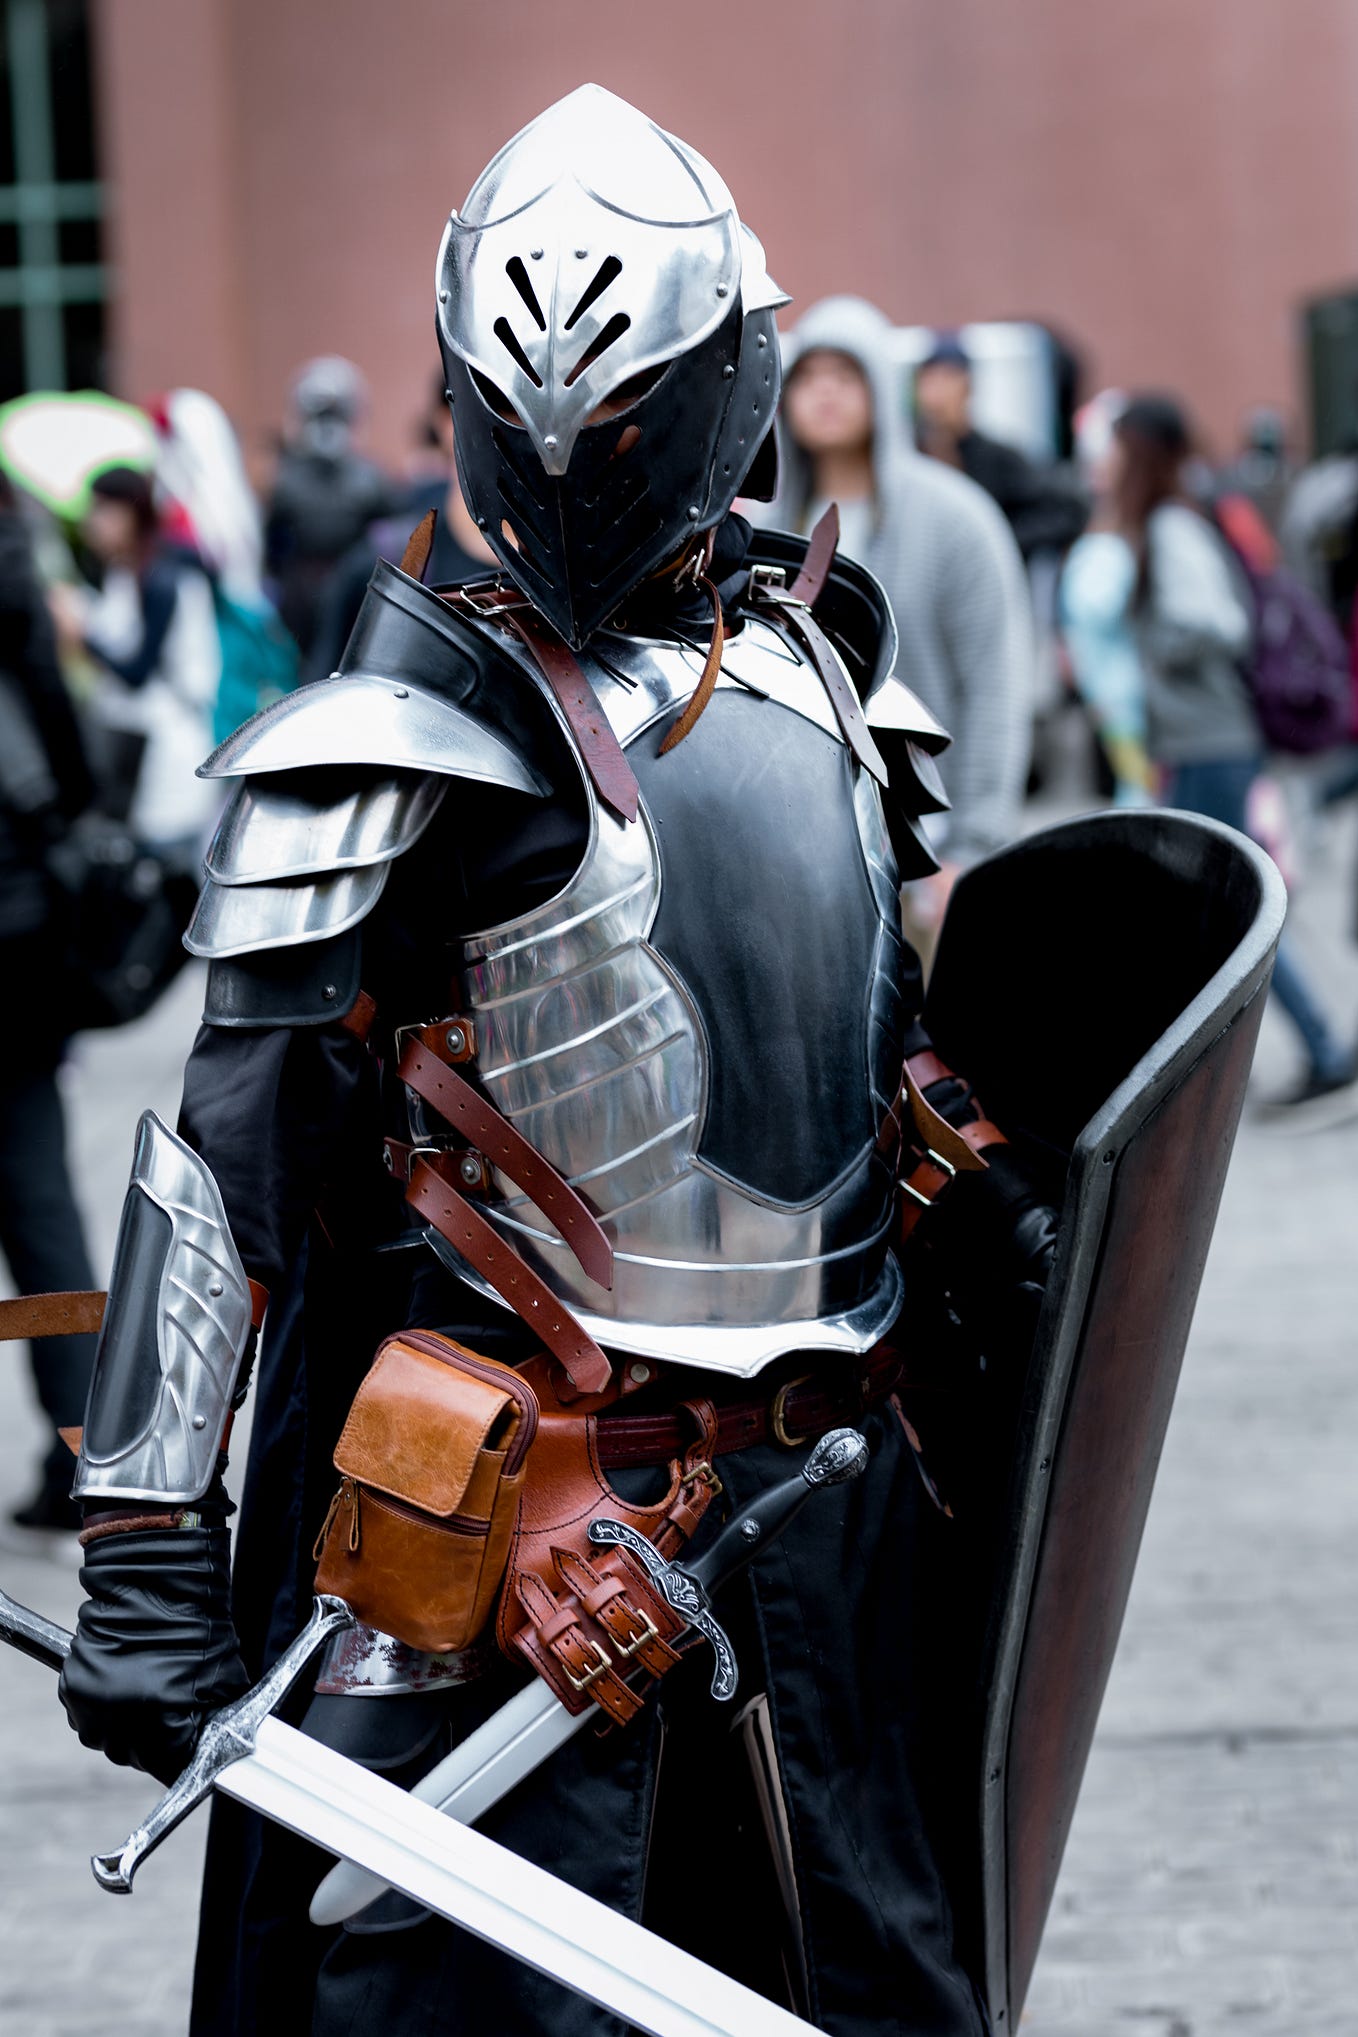 A man standing with armor on and many people behind and beside him.